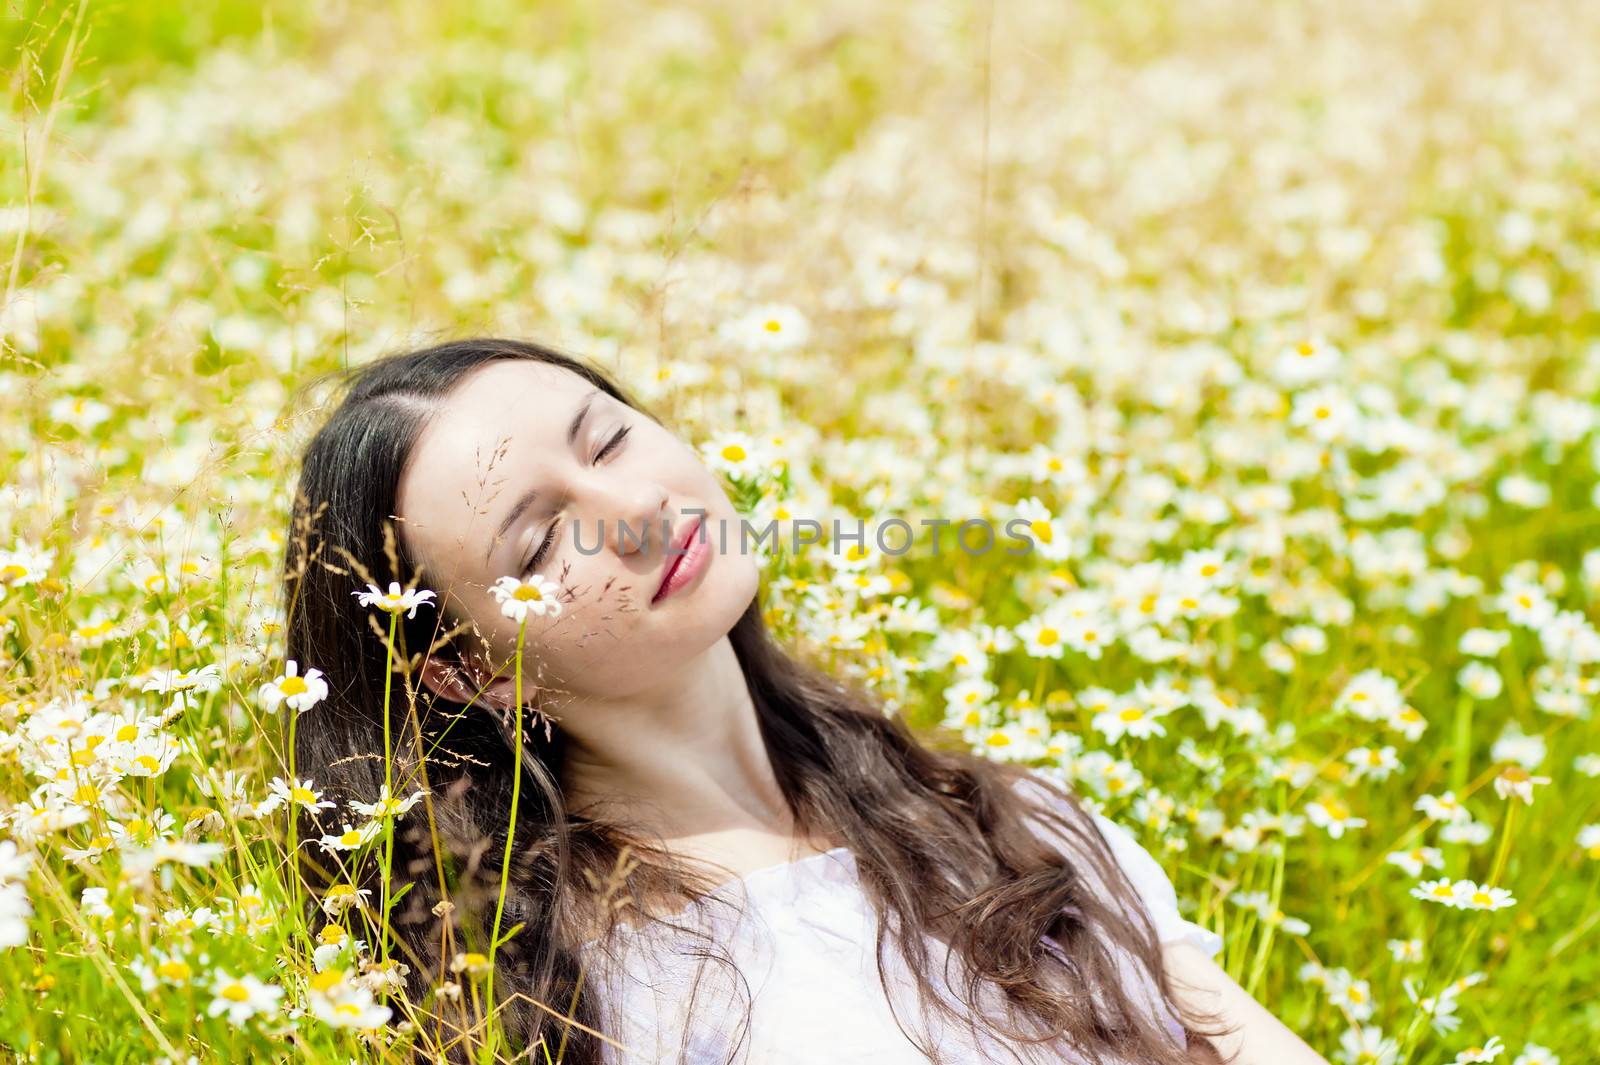 woman with closed eyes relaxes in daisies by kosmsos111